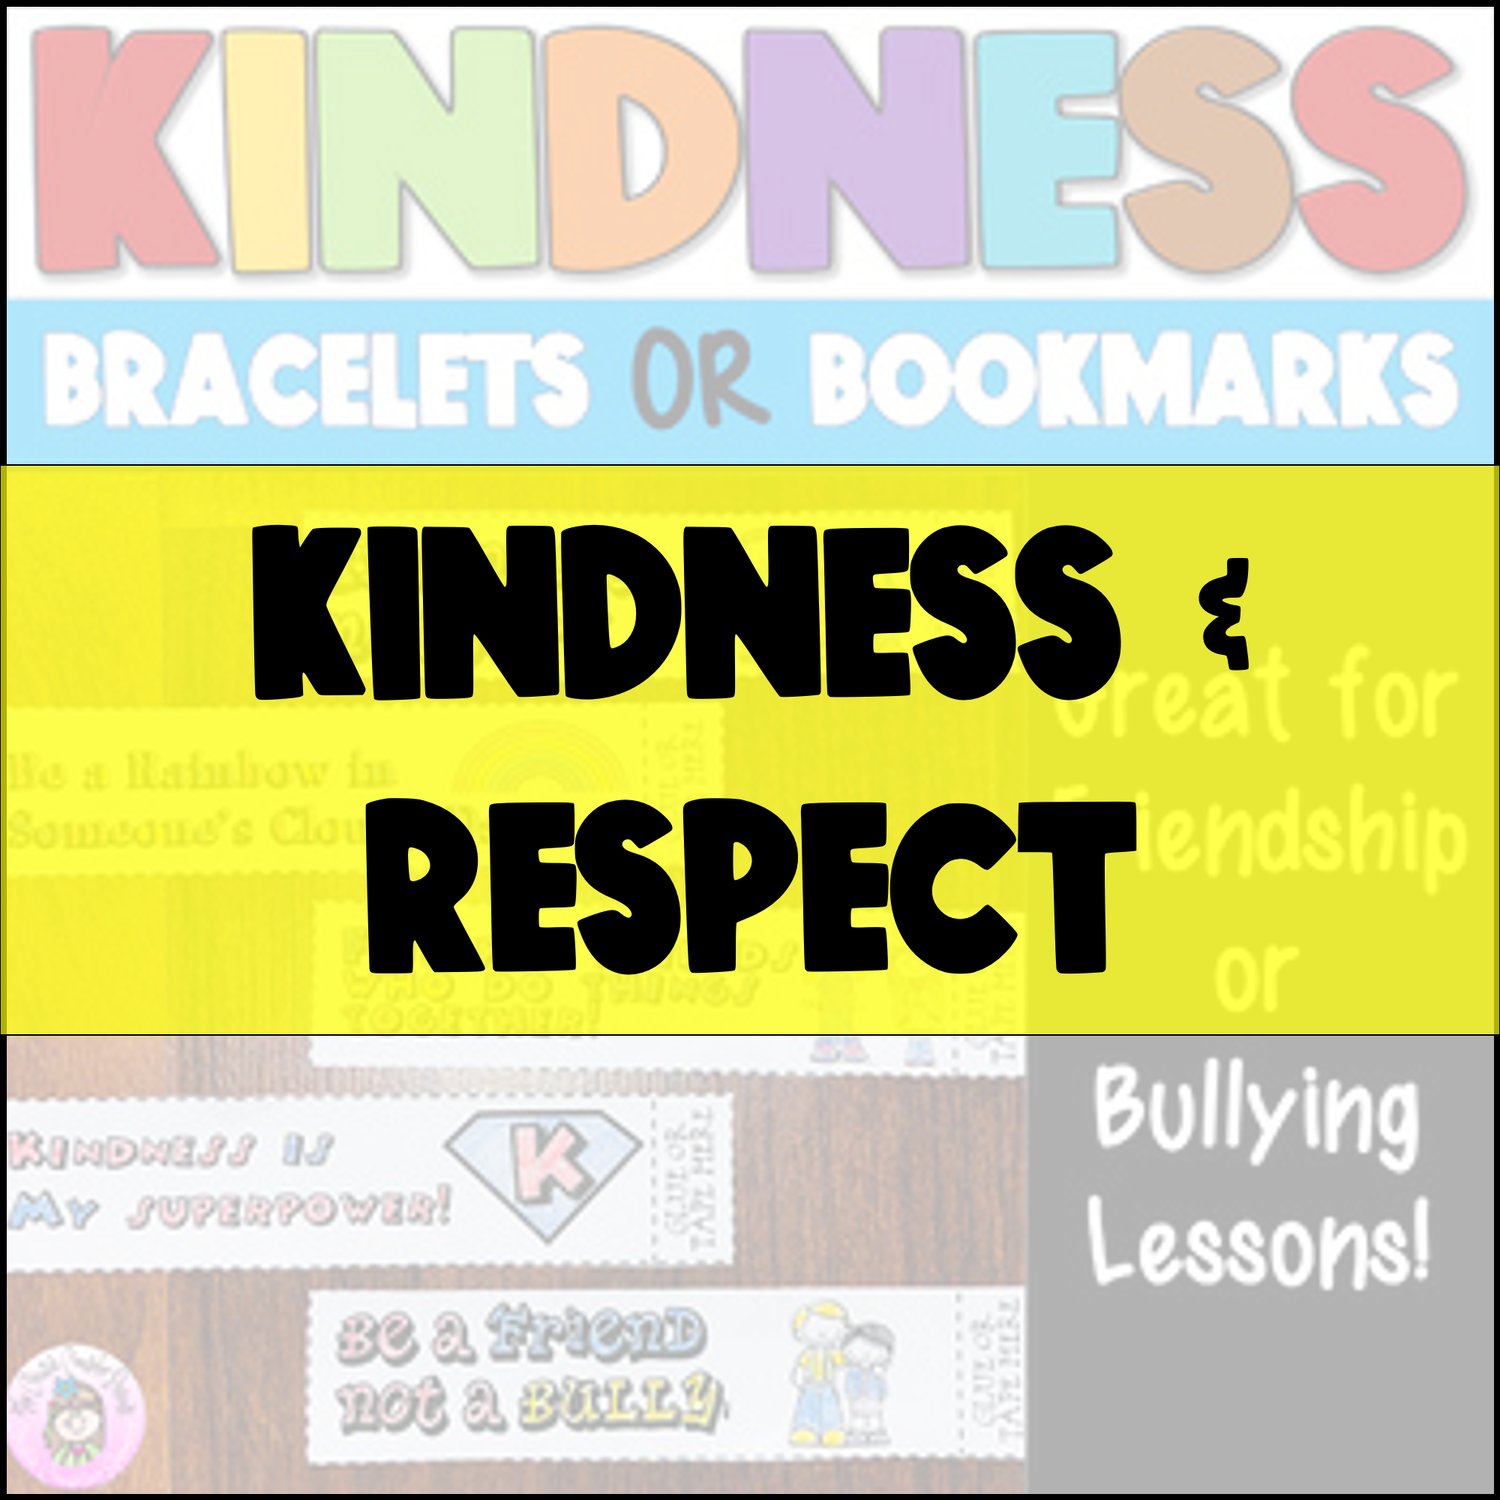 Kindness & Respect Activities & Lessons